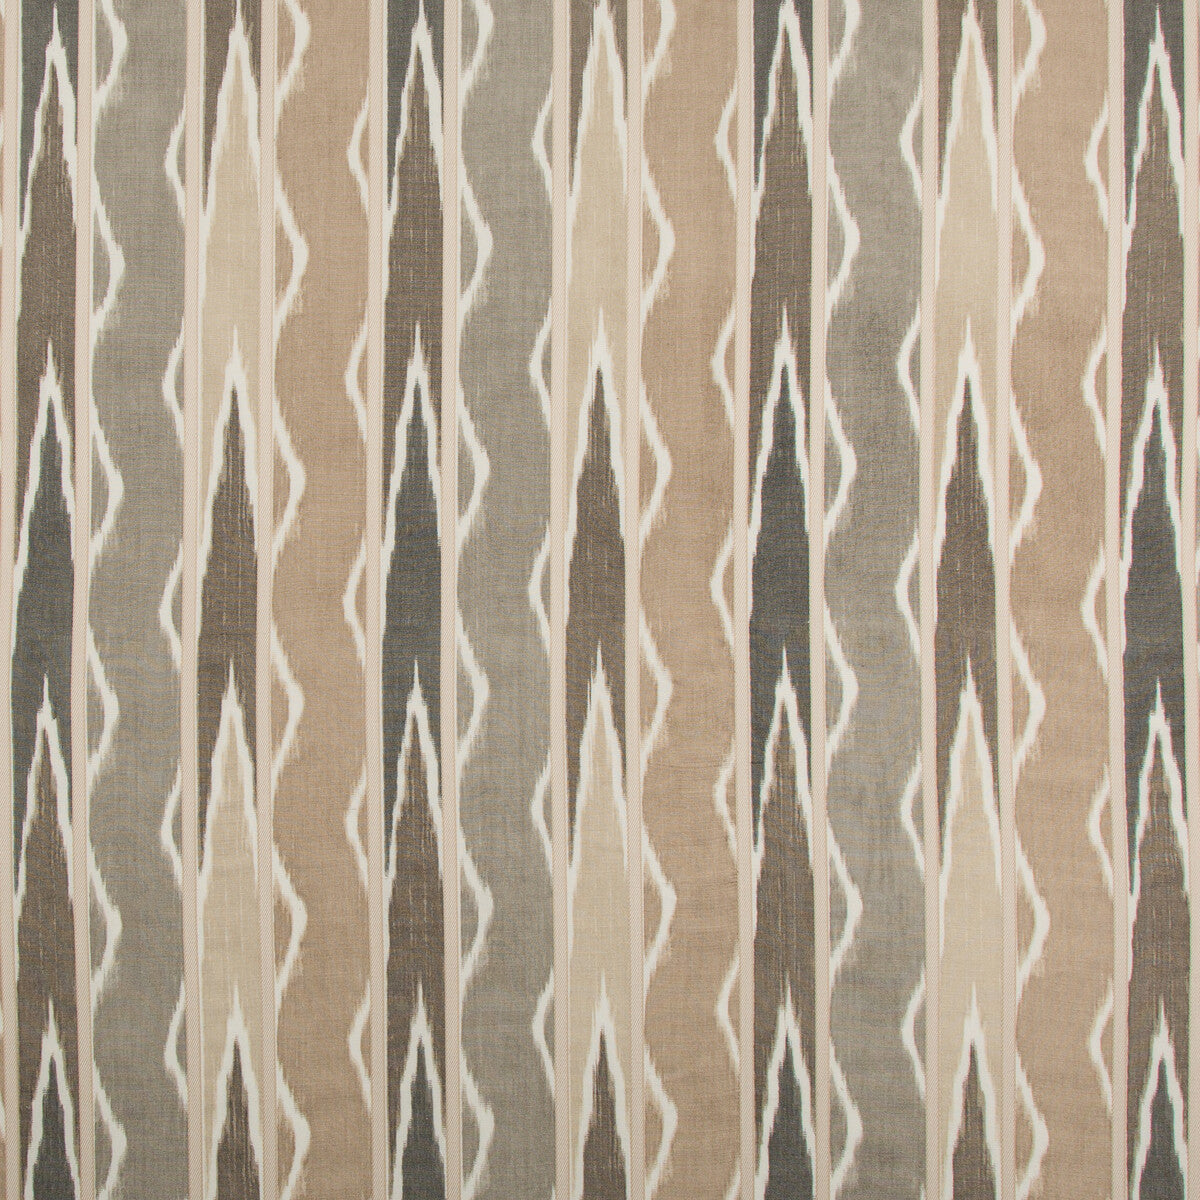 Ubud fabric in sandstone color - pattern UBUD.16.0 - by Kravet Couture in the Modern Colors-Sojourn Collection collection